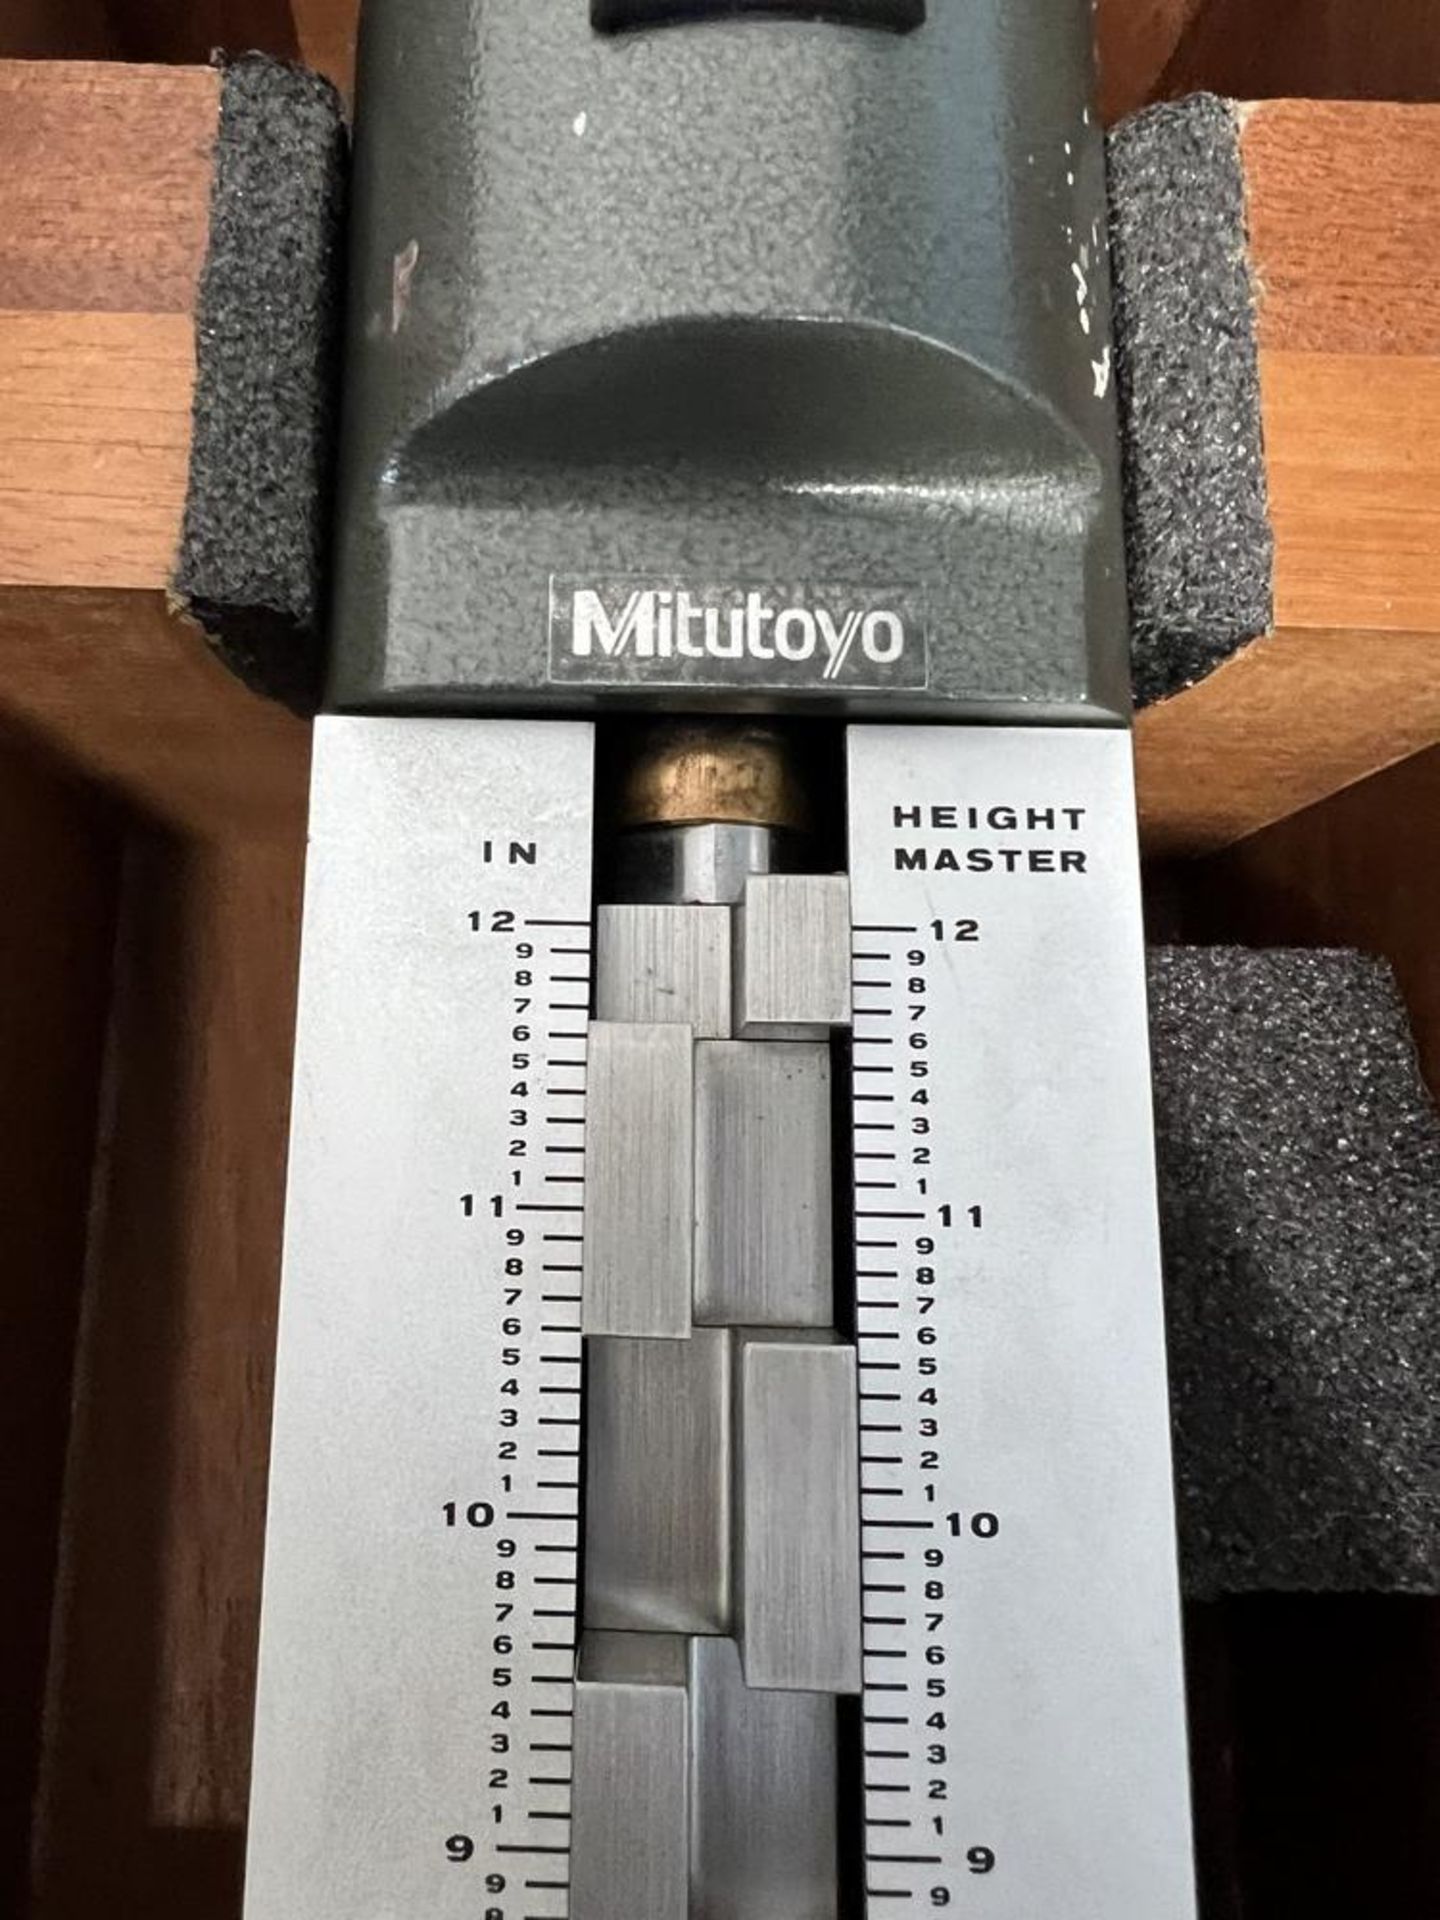 Mitutoyo 12" Precision Height Master Gage - Image 4 of 7